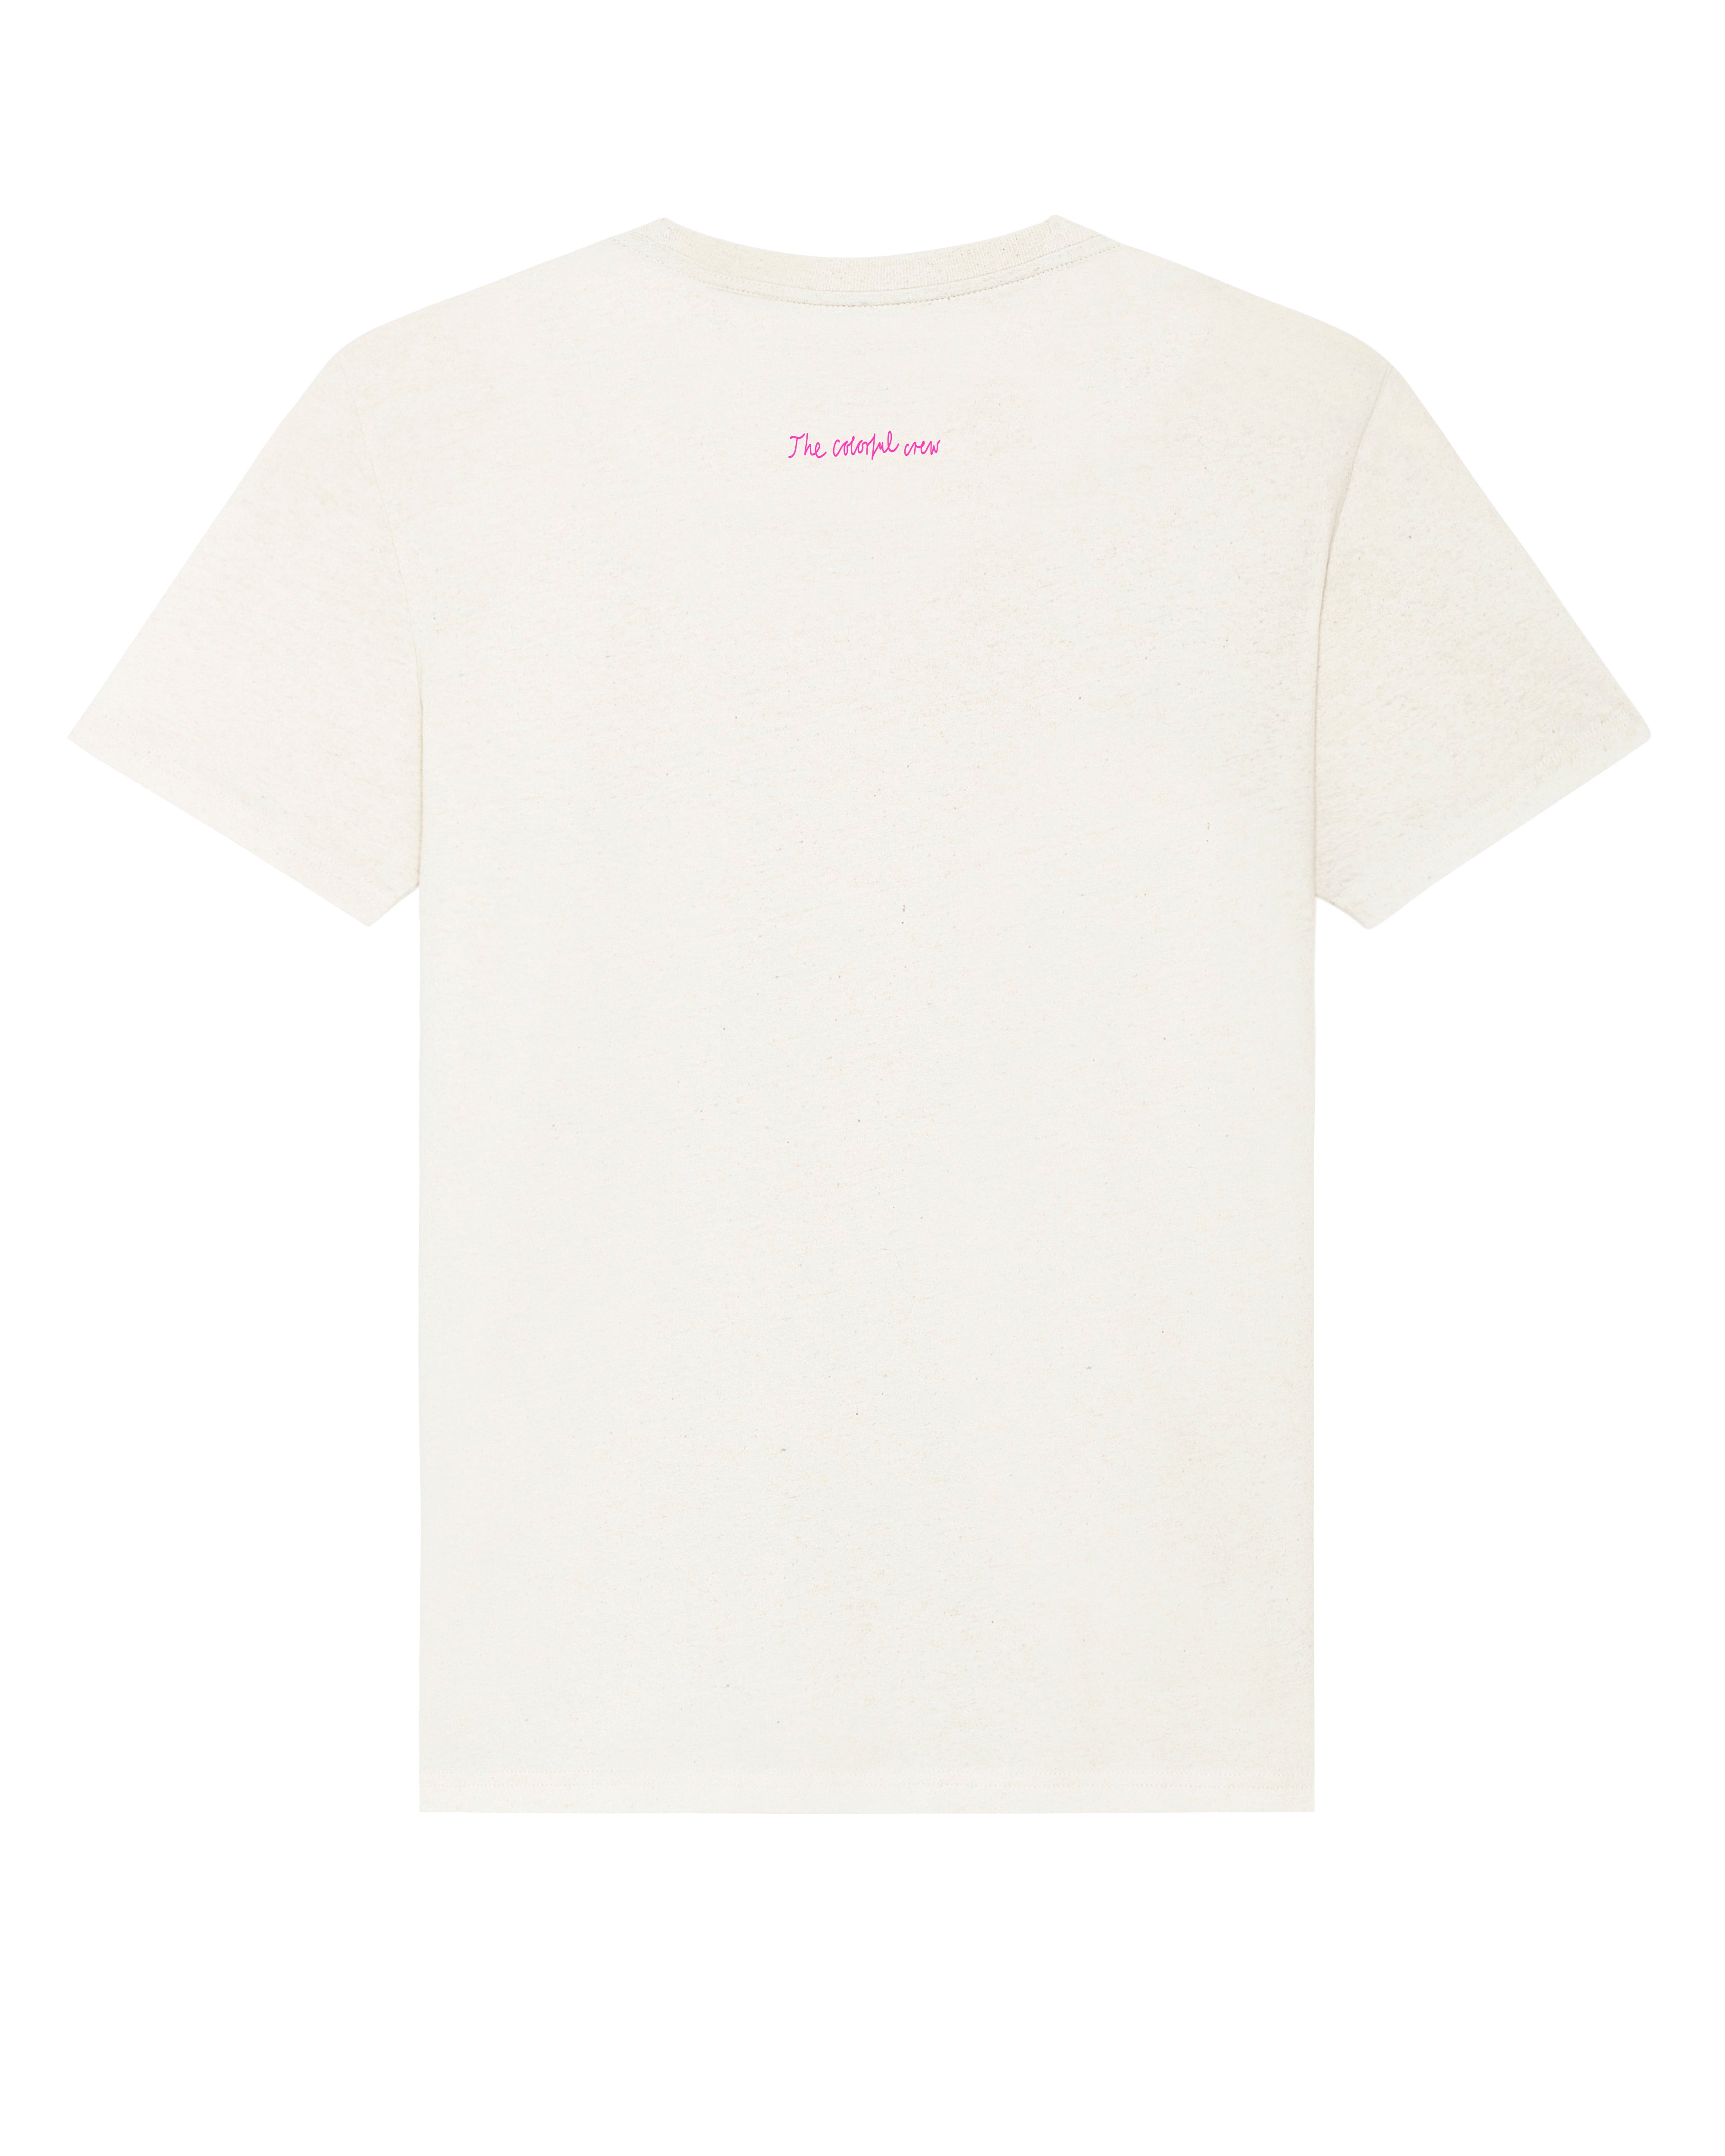 AMORE T-Shirt white// BESTSELLER // Limited Edition